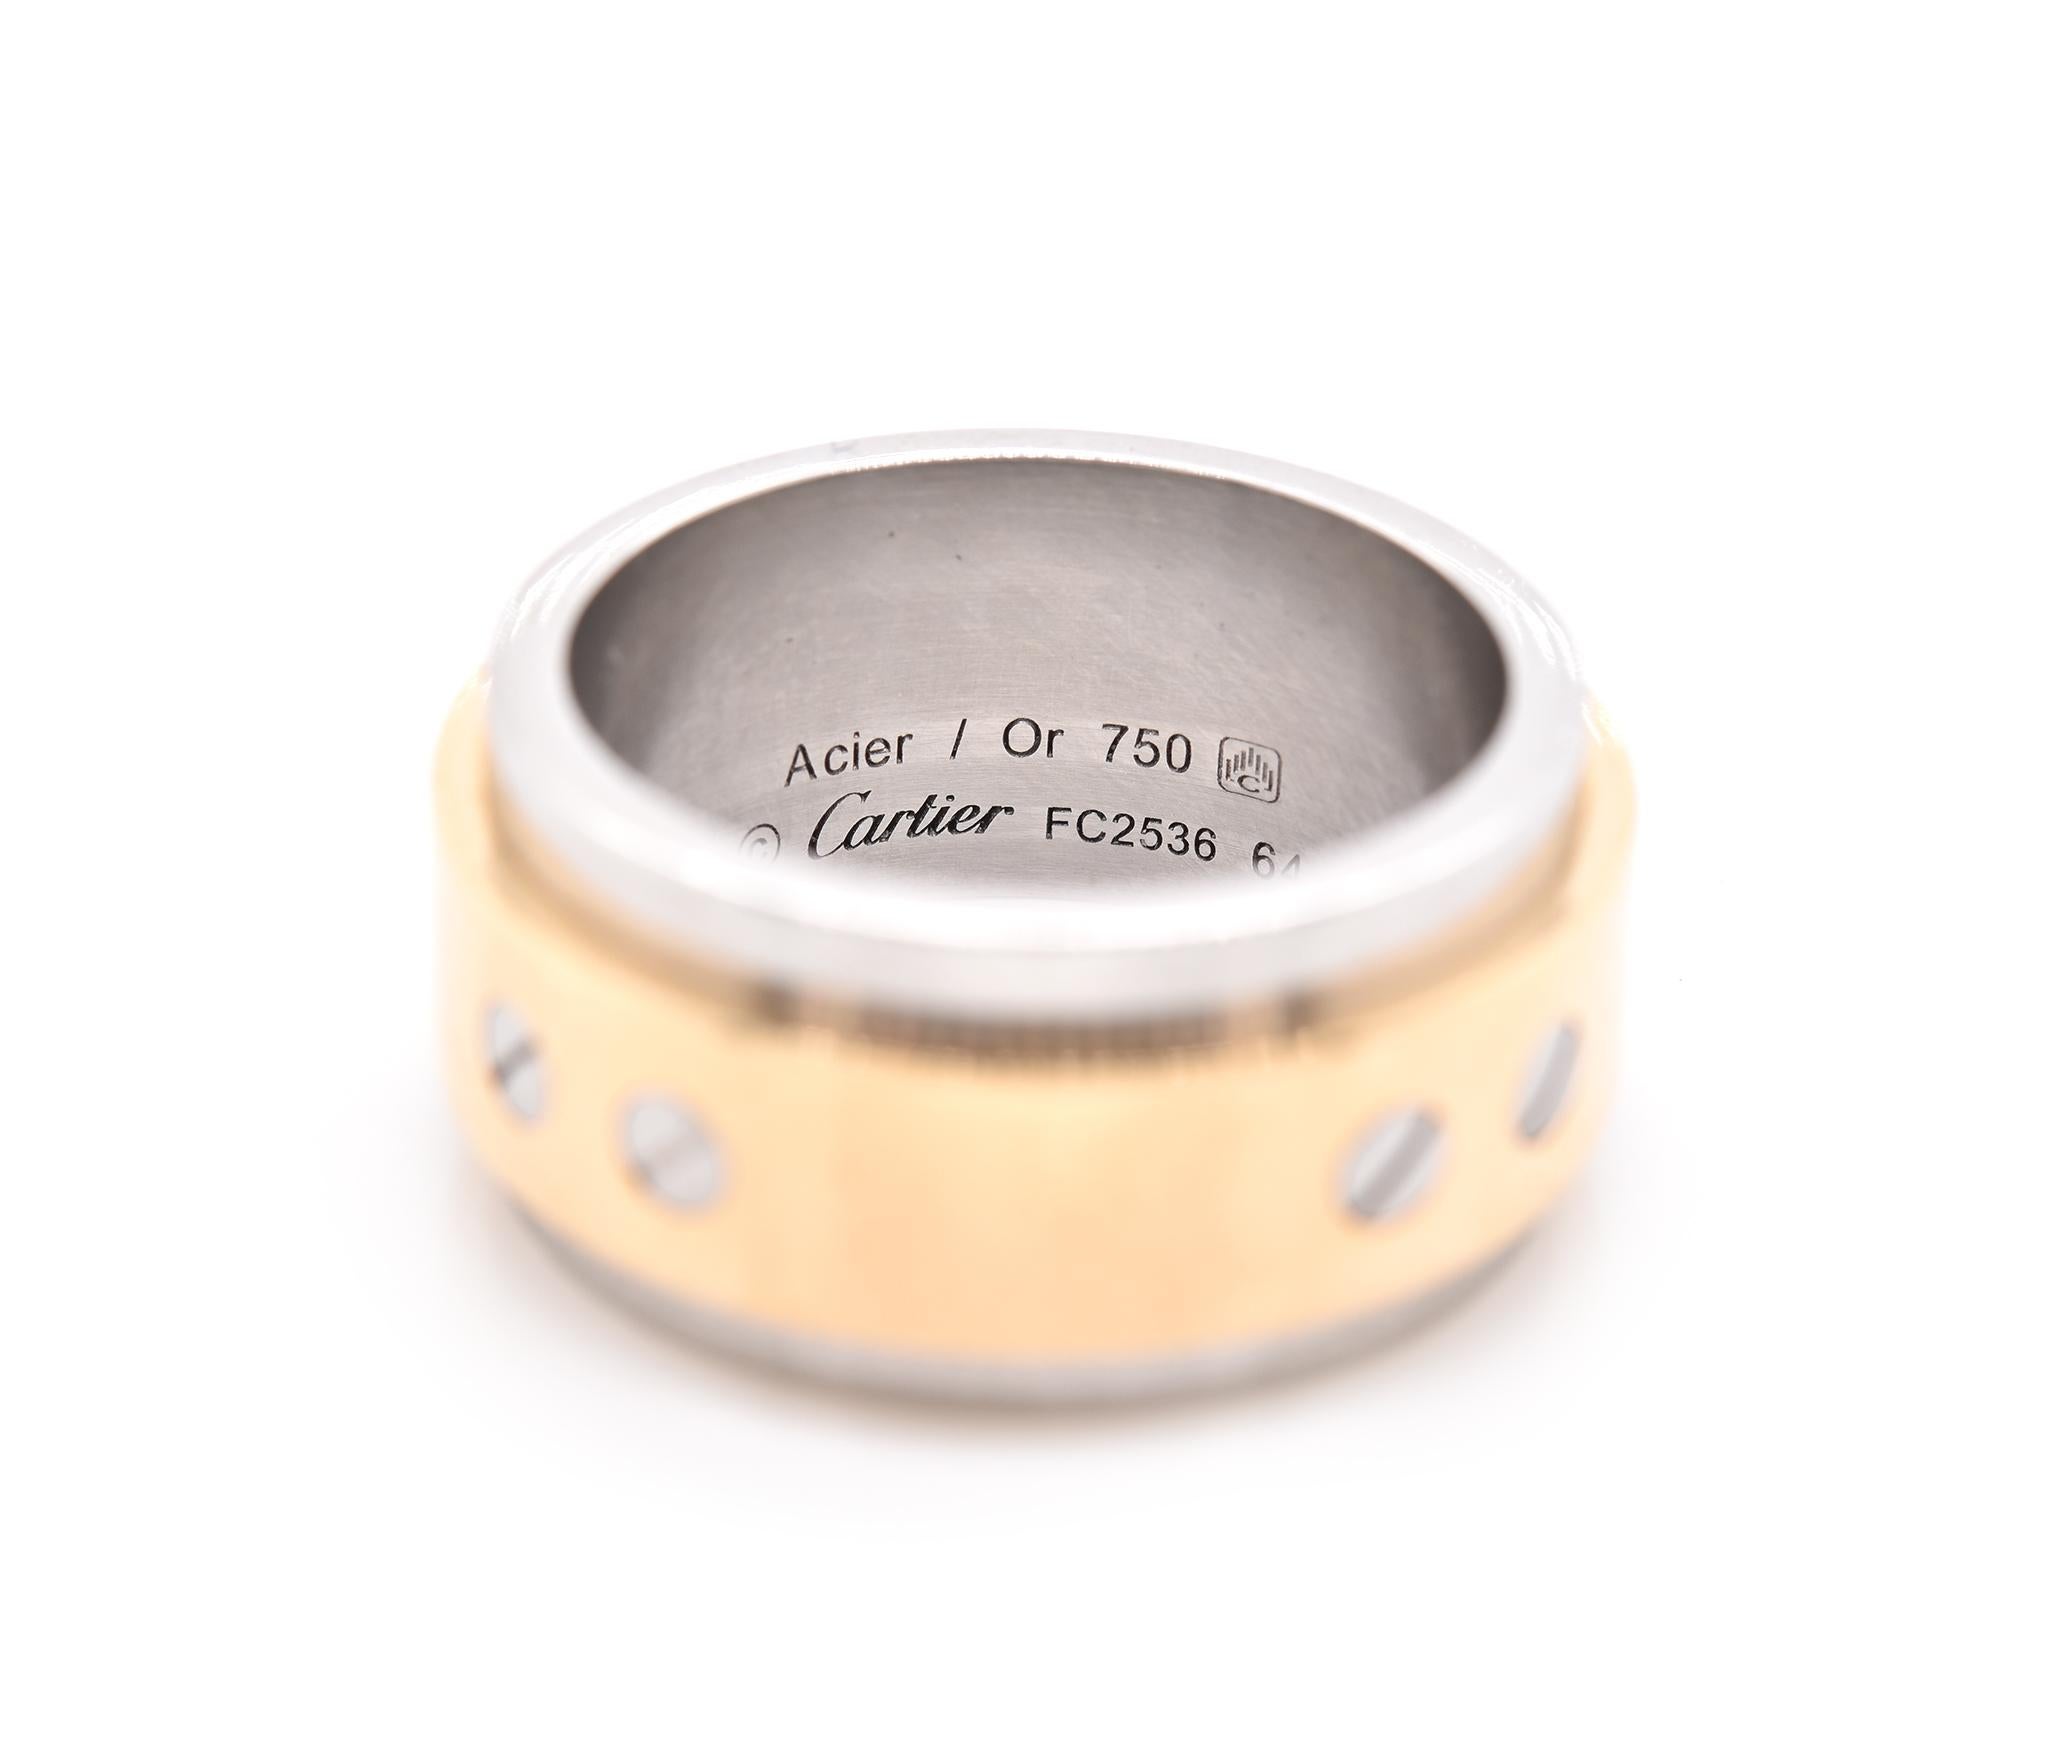 Designer: Cartier
Material: 18K white & yellow gold
Serial # FC2XXX
Weight: 22.43 grams 
Size: 64 / 10.75
